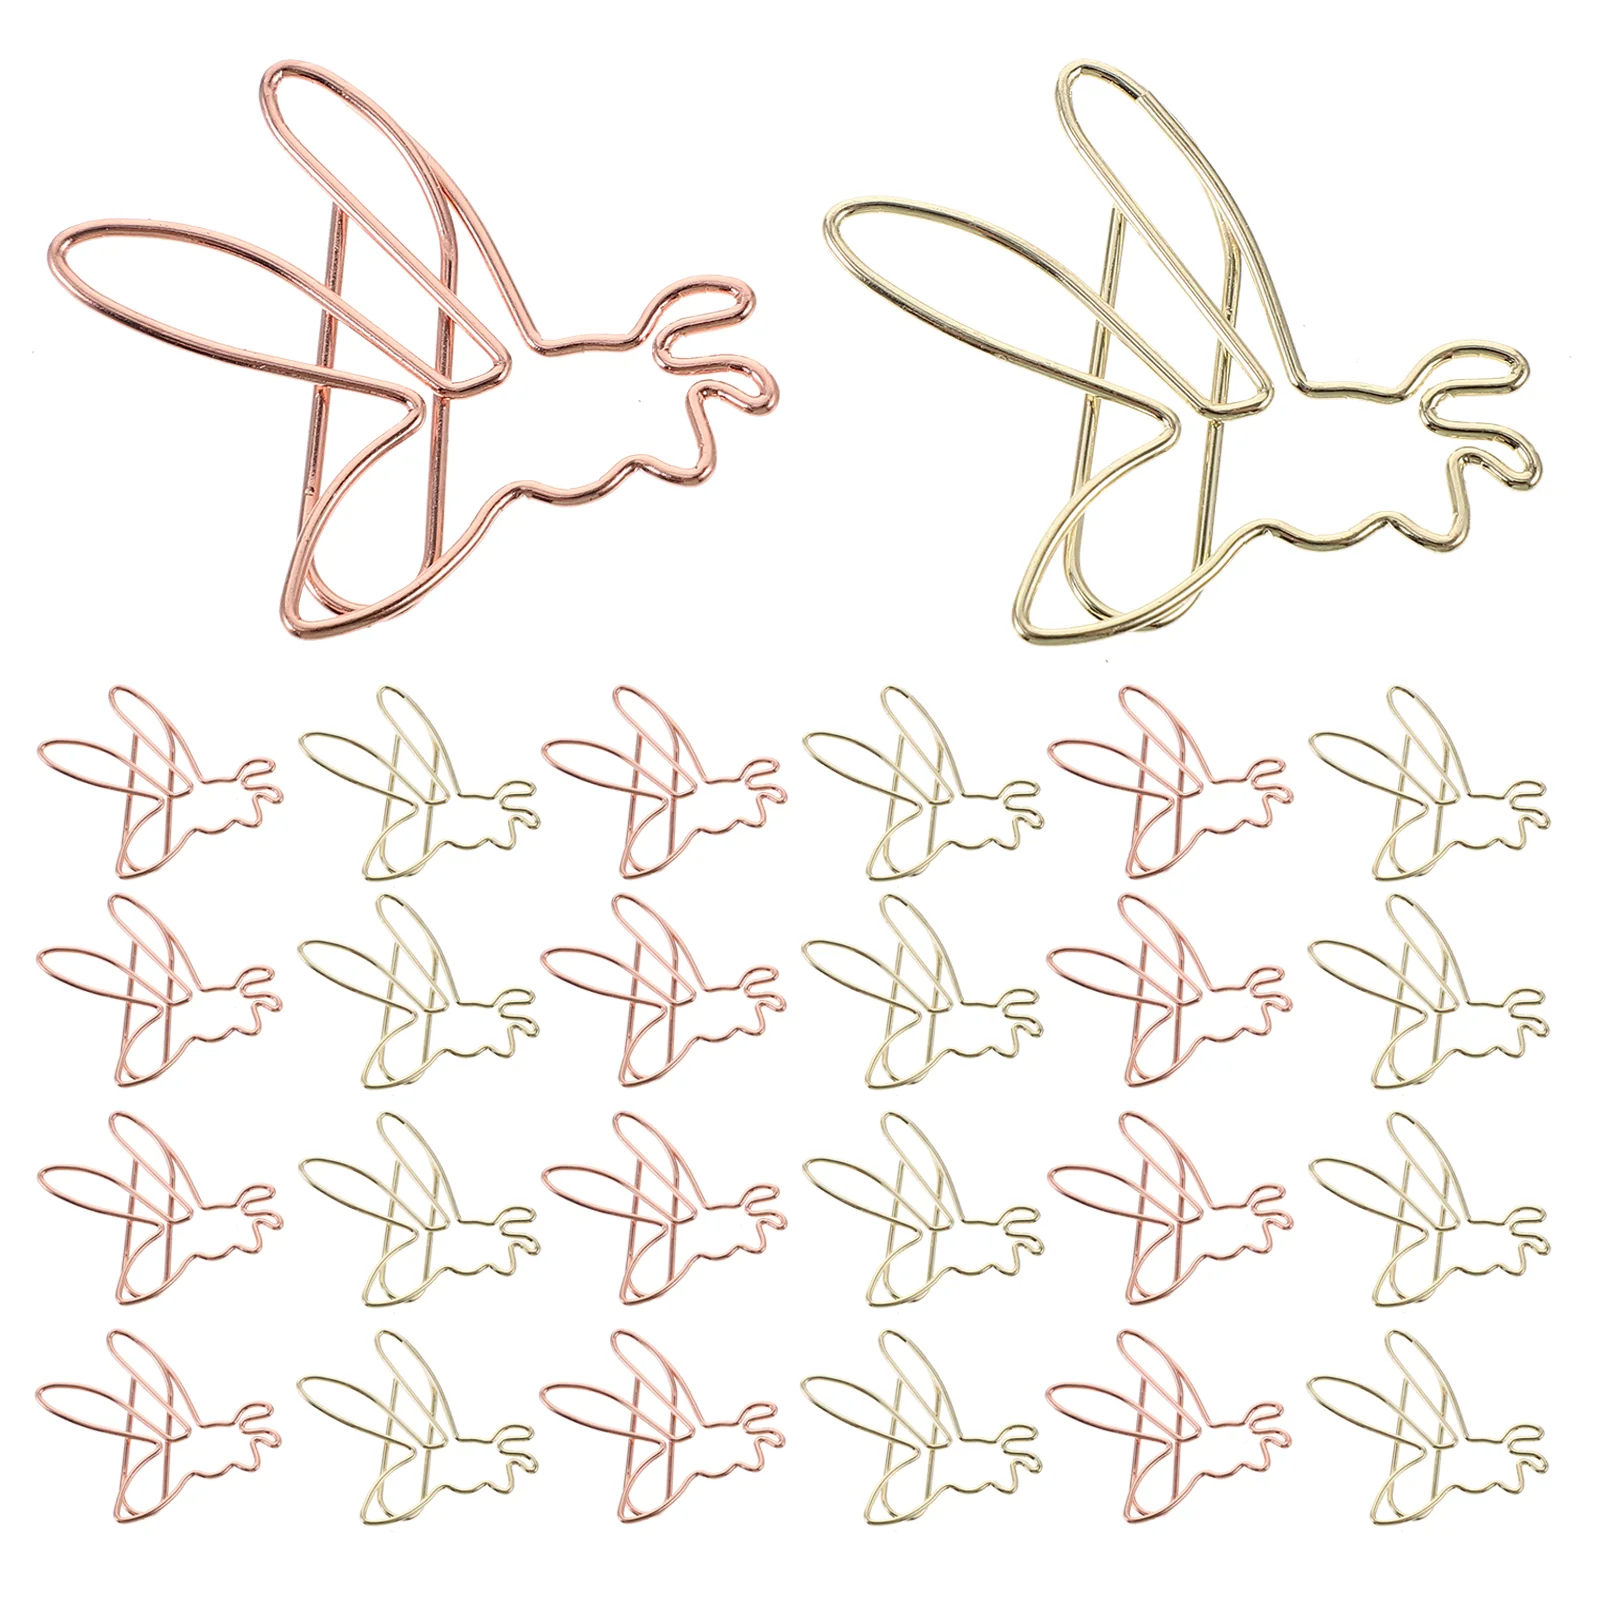 

20 Pcs Cute Paper Clips Bookmark Small Zinc Alloy Creative Shaped Document Office Student Metal Paperclips